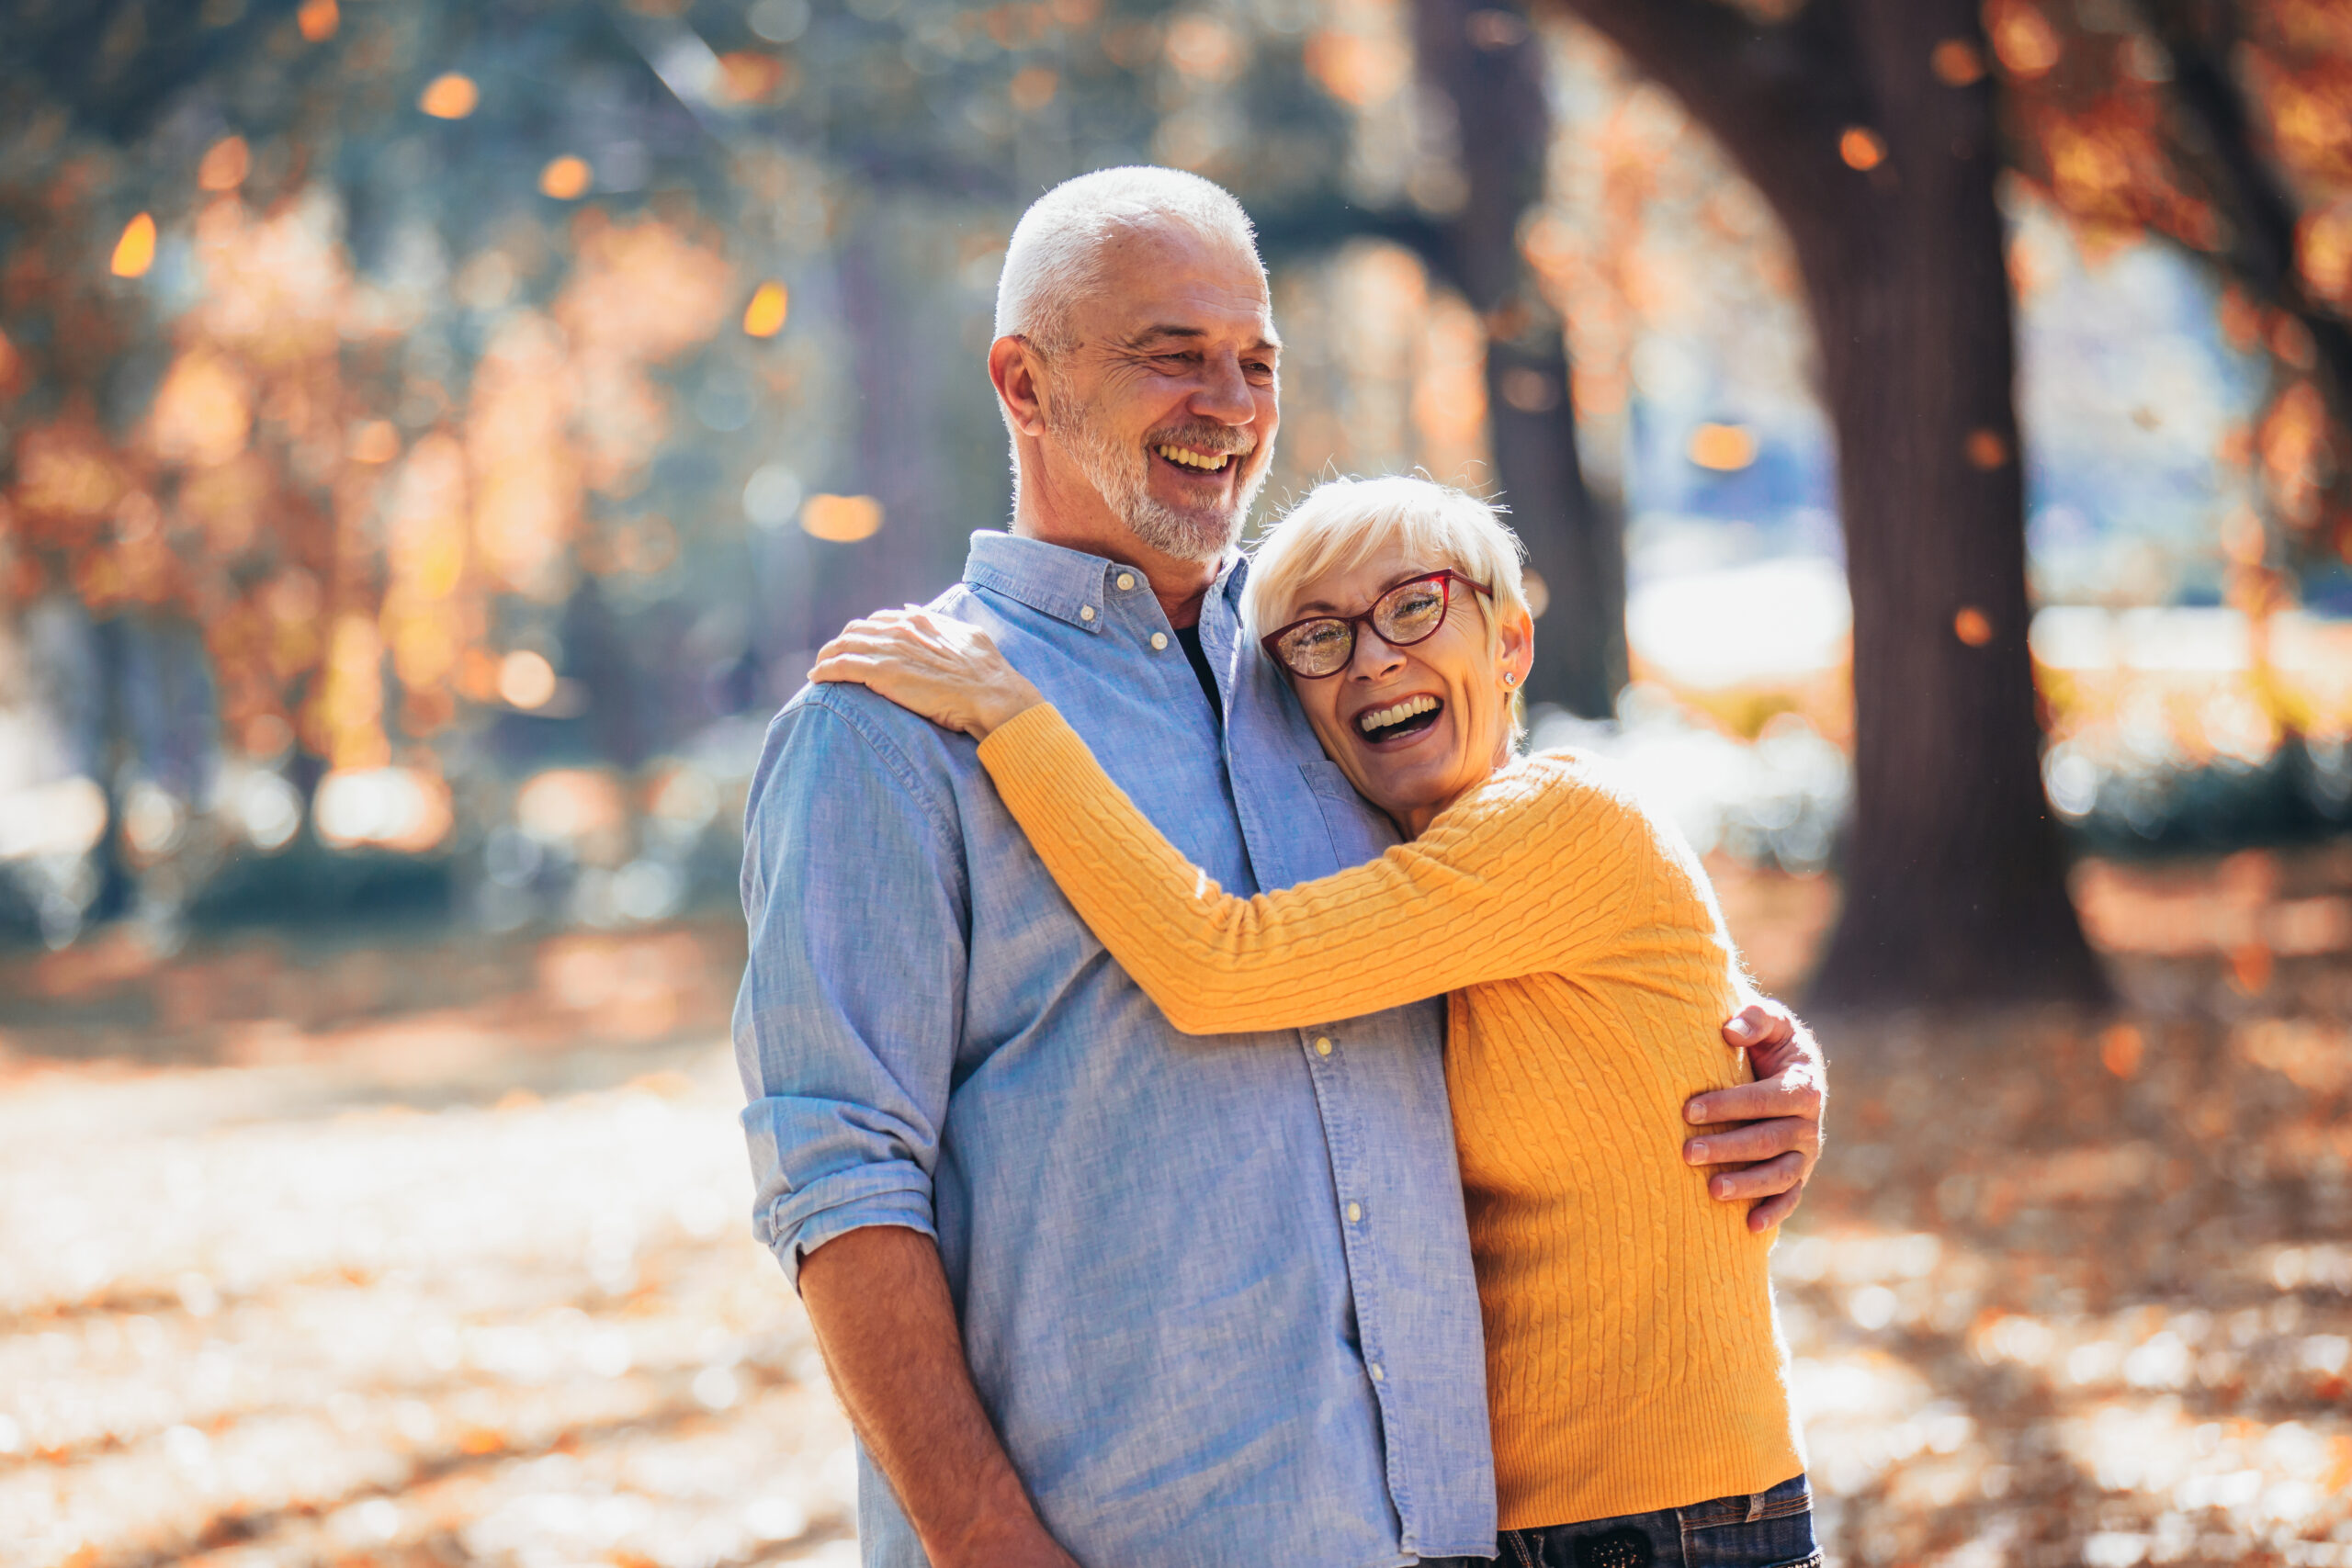 The best fall activities for seniors in assisted living